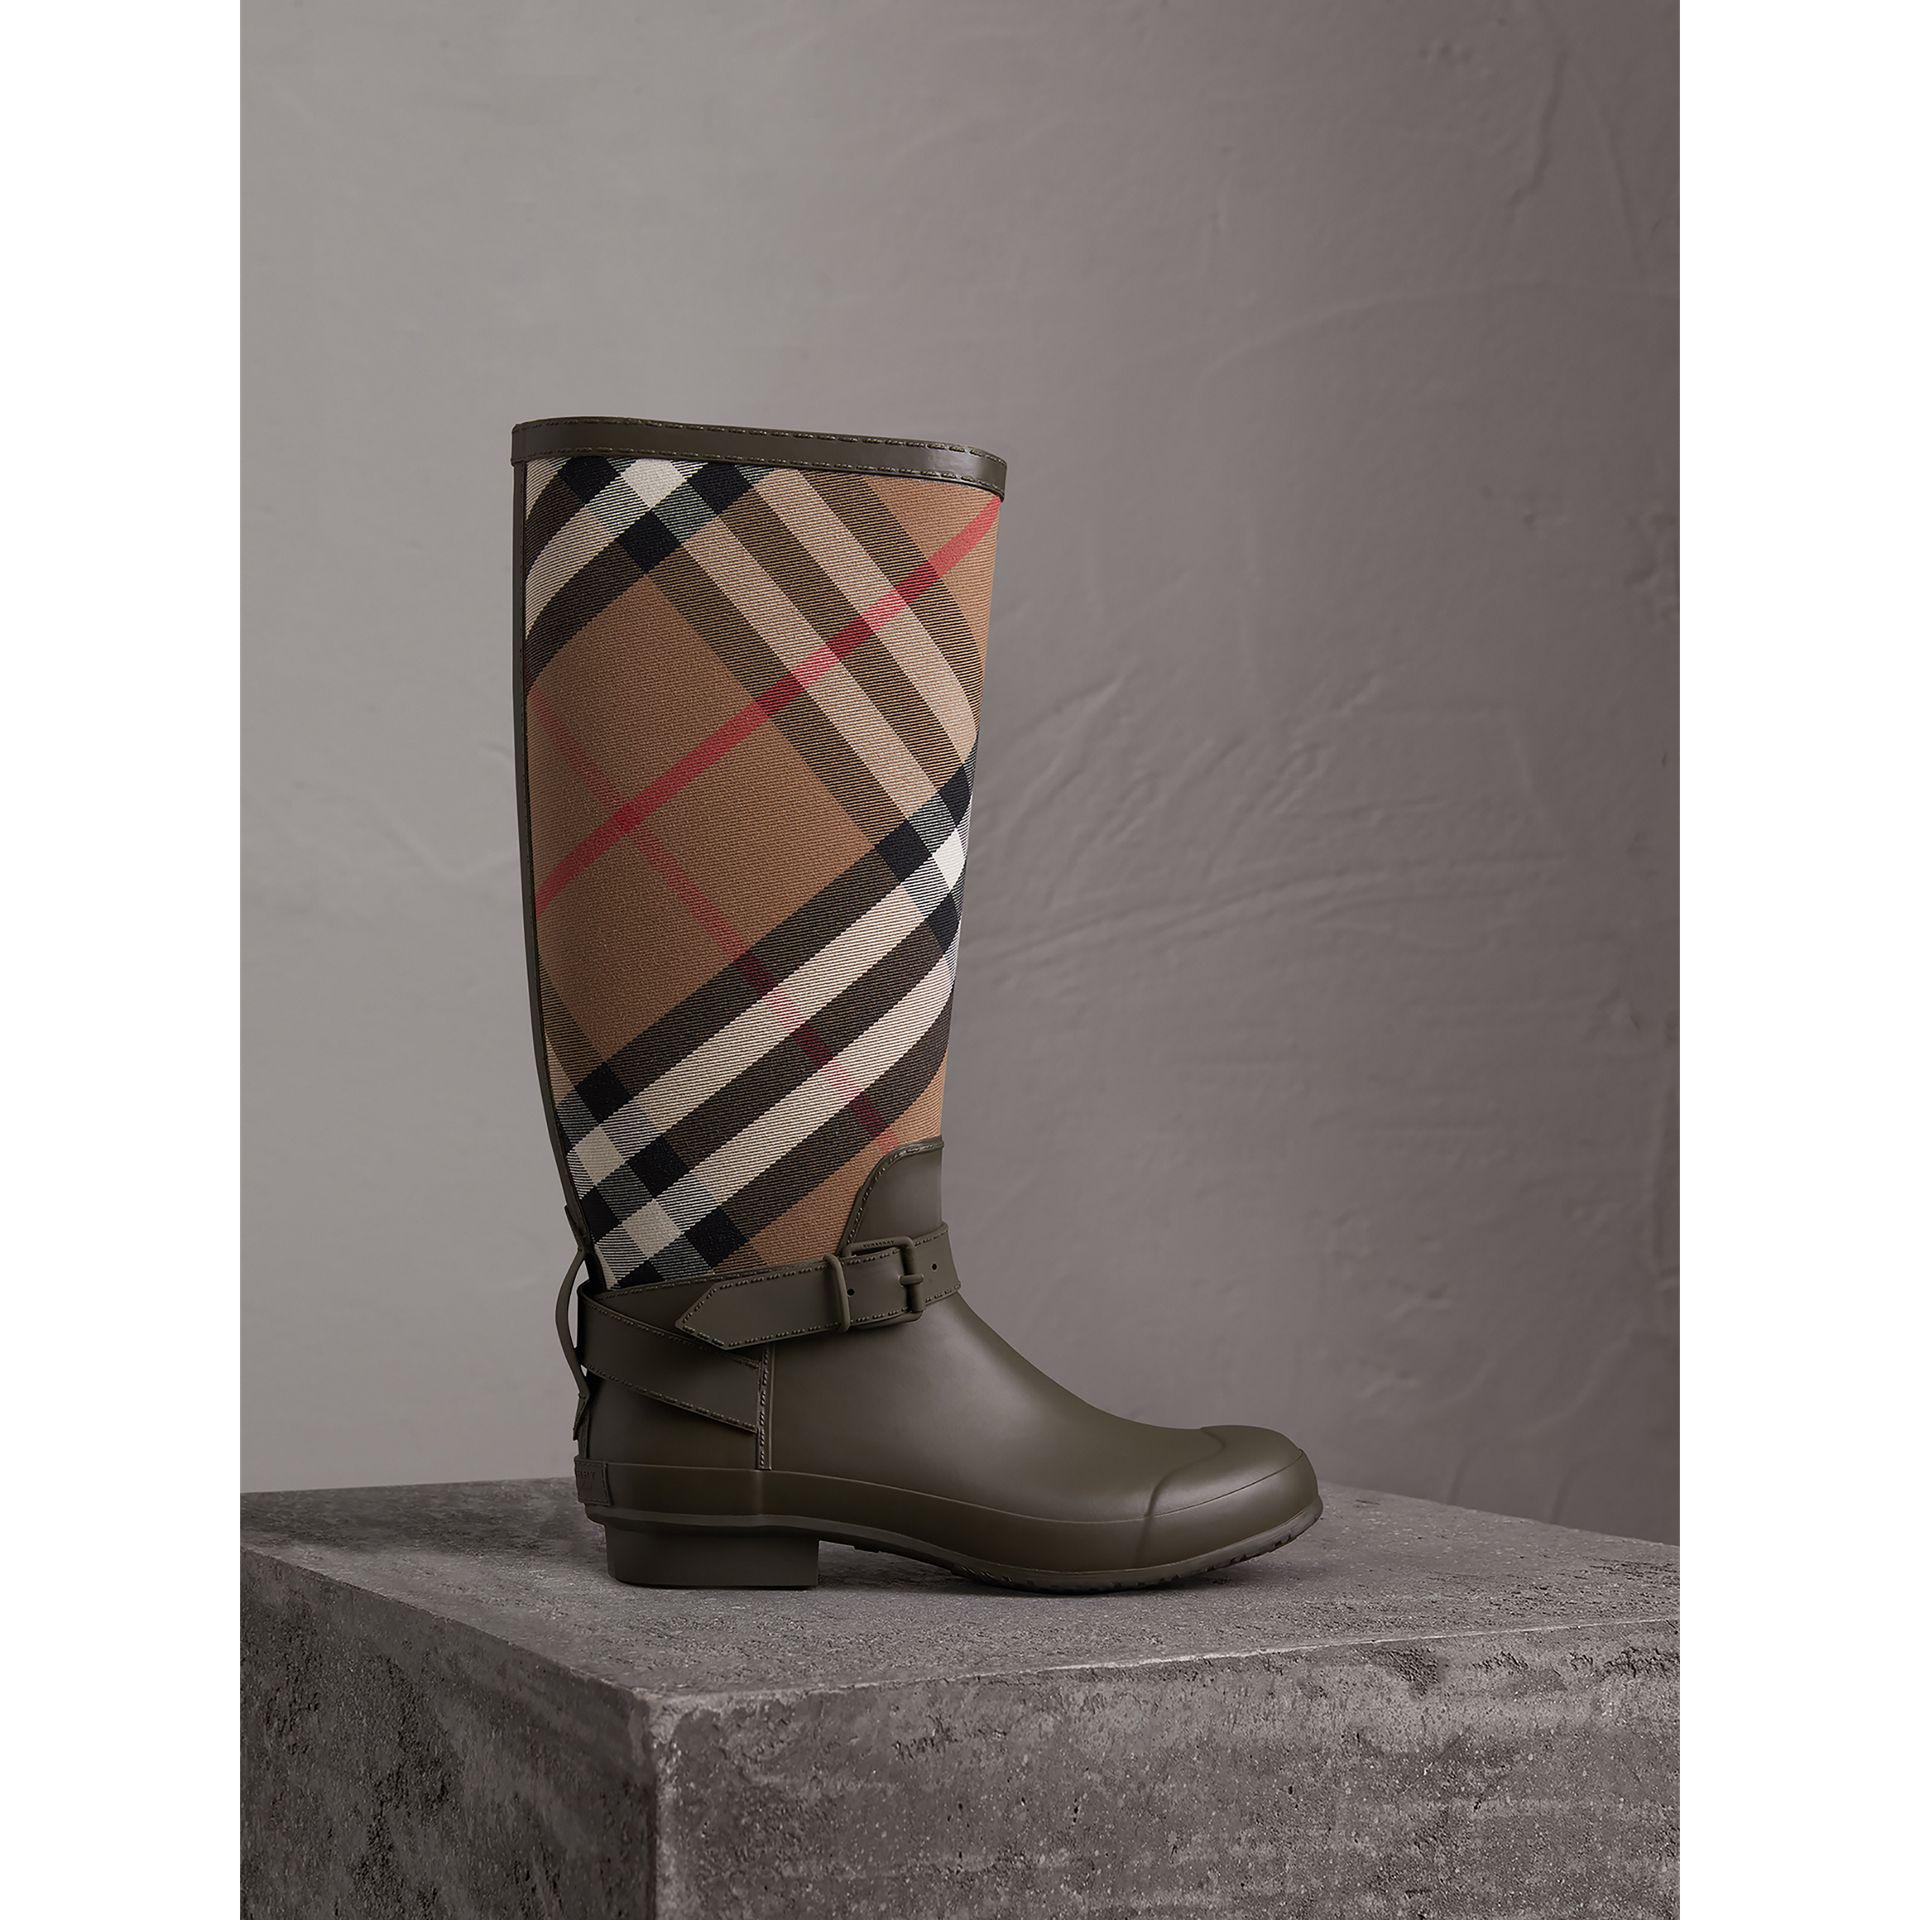 Burberry Belt Detail House Check And Rubber Rain Boots for Men - Lyst